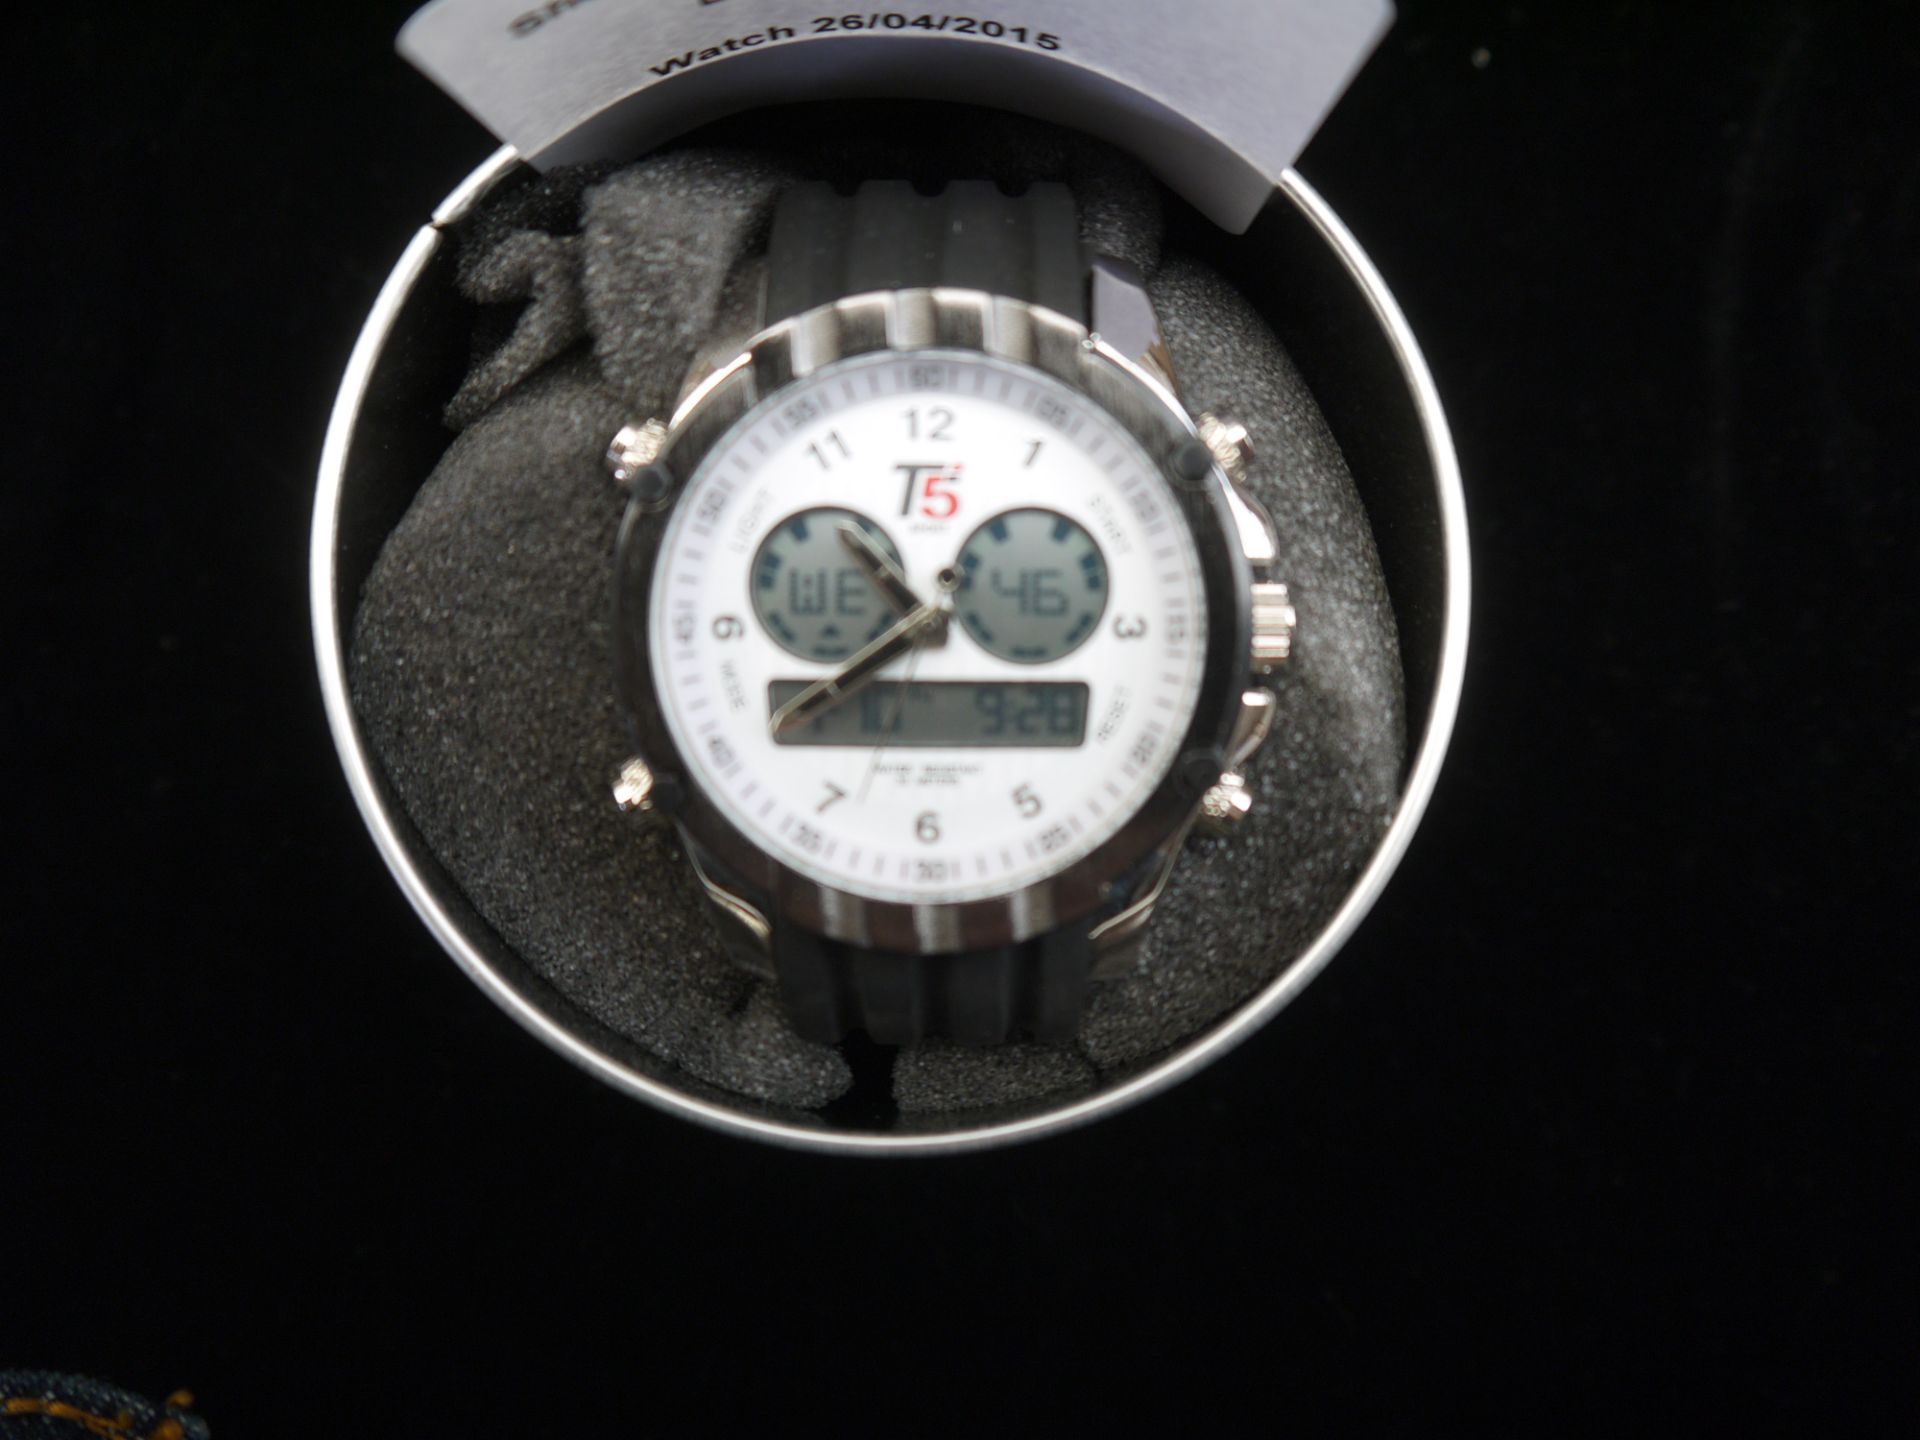 The T5 Astor A3 has a white dial with digital chronograph inner dials. Alarm and date function. - Image 2 of 2